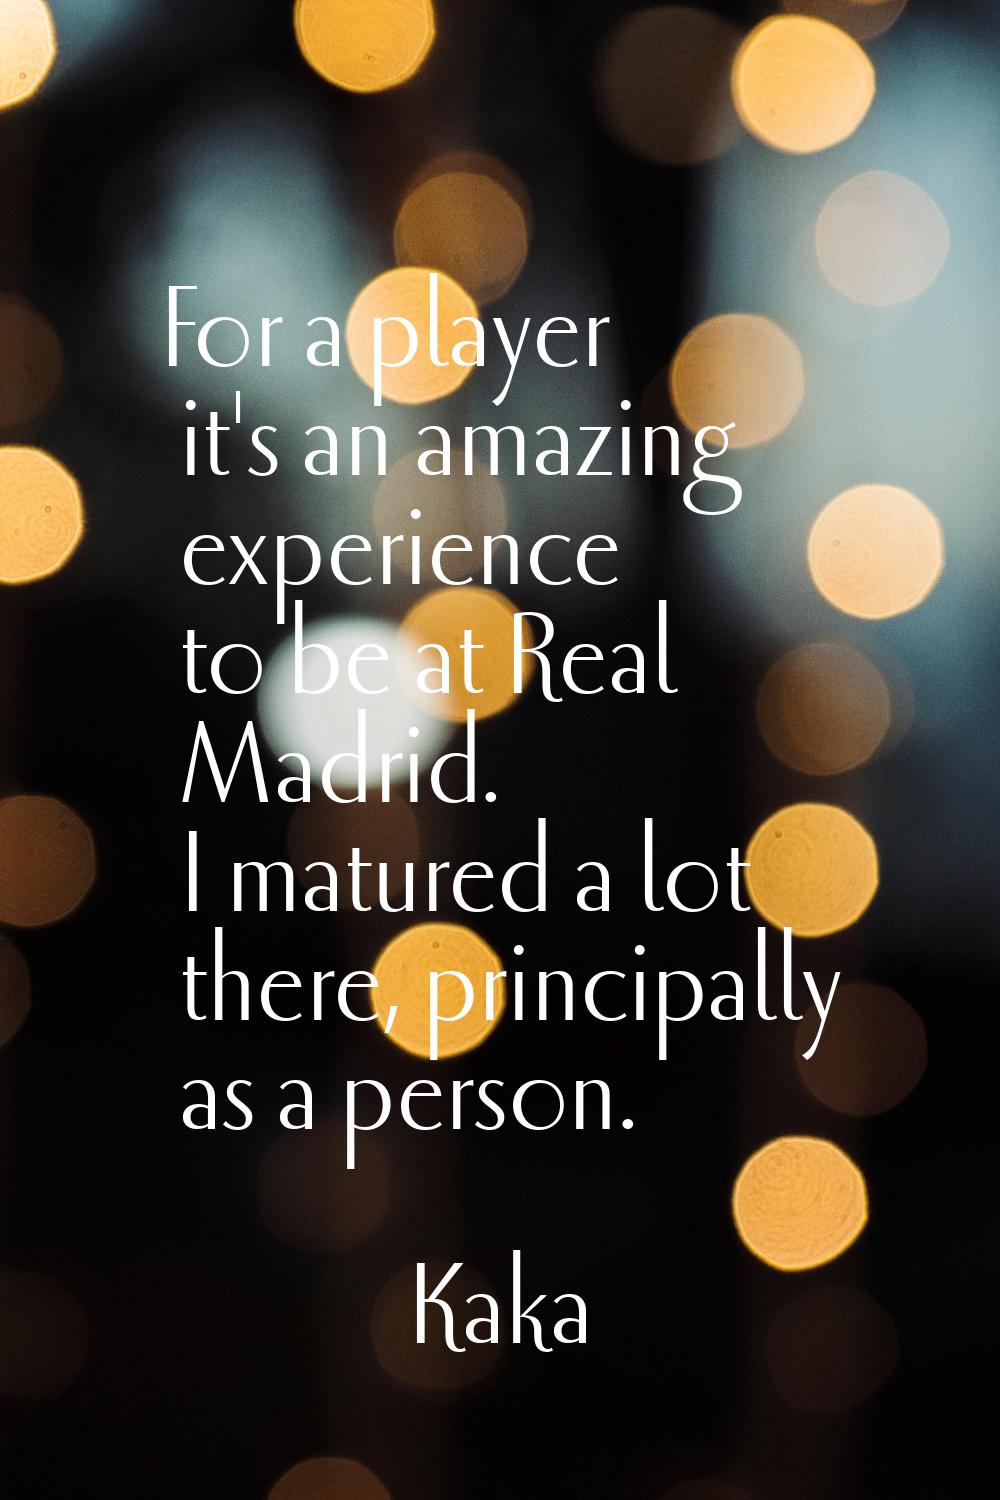 For a player it's an amazing experience to be at Real Madrid. I matured a lot there, principally as